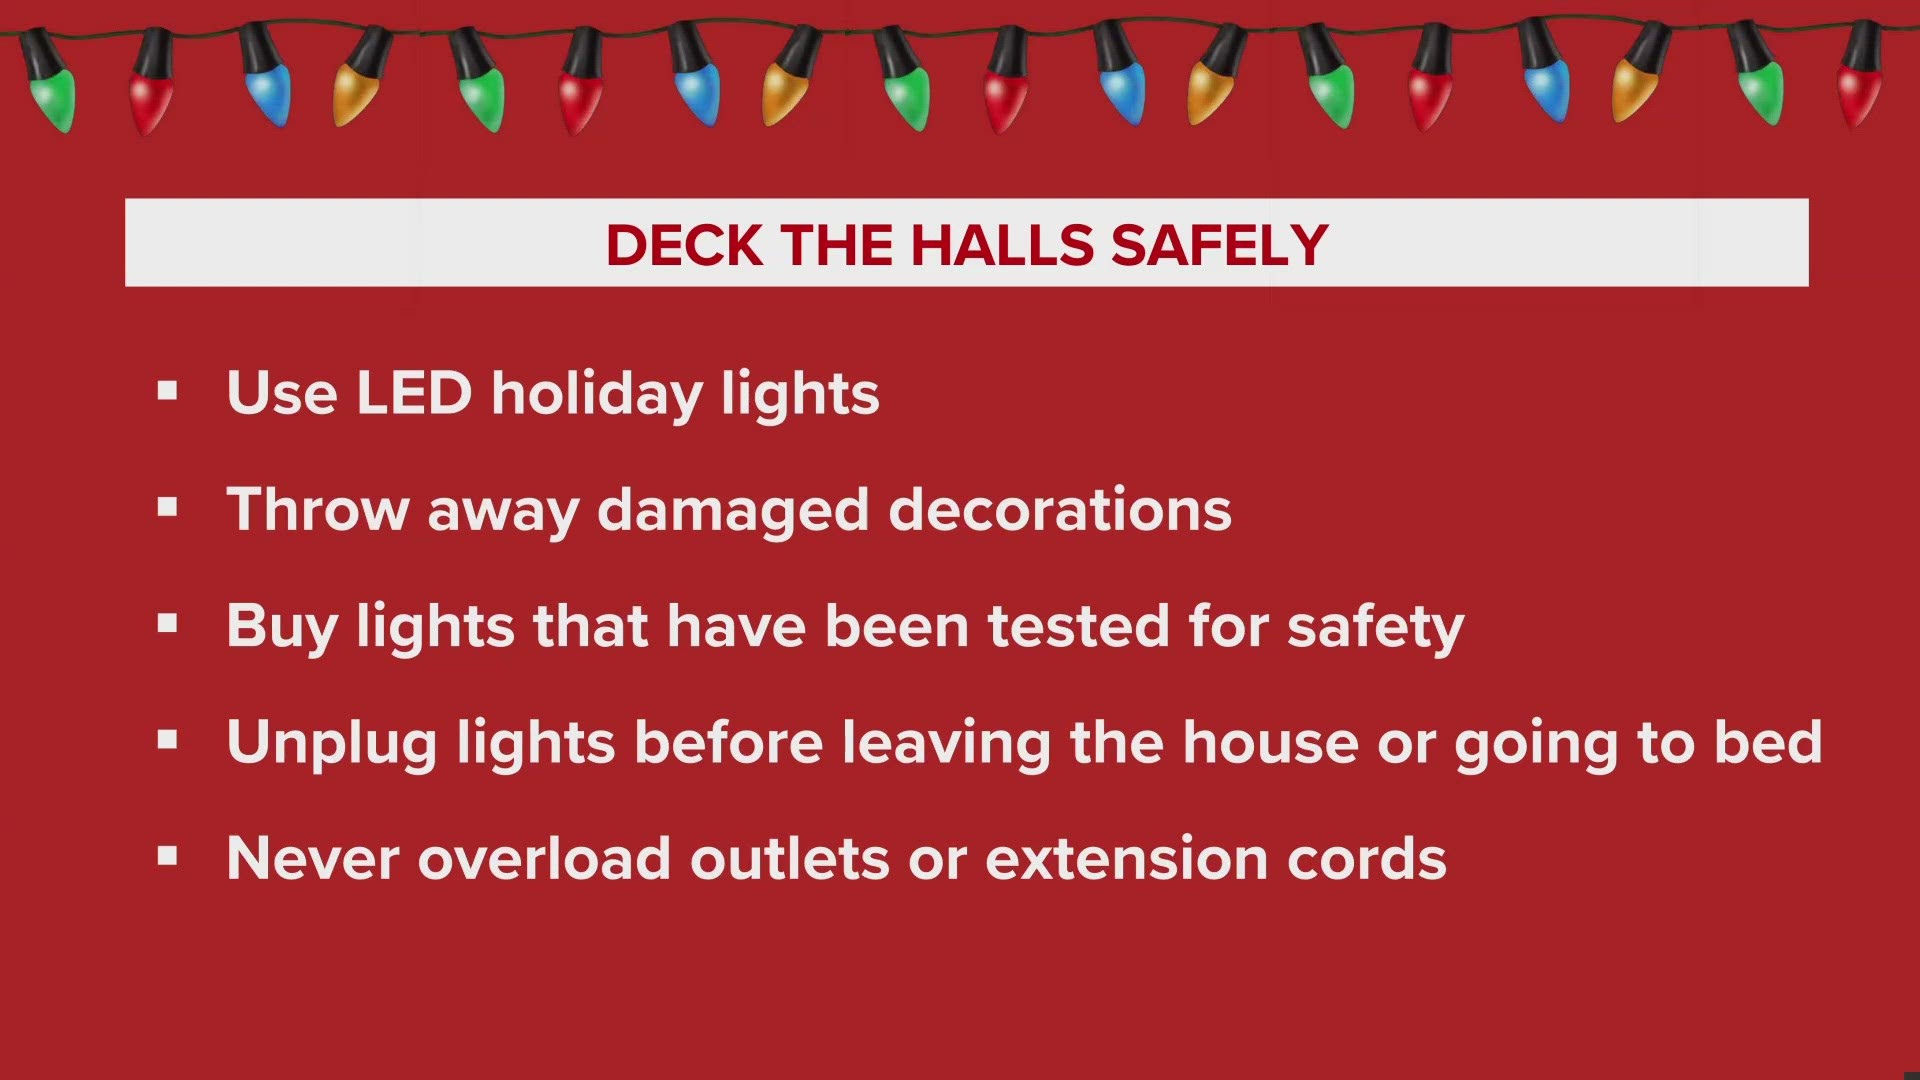 If you still need to put up your Christmas tree and lights, here are some important safety tips.